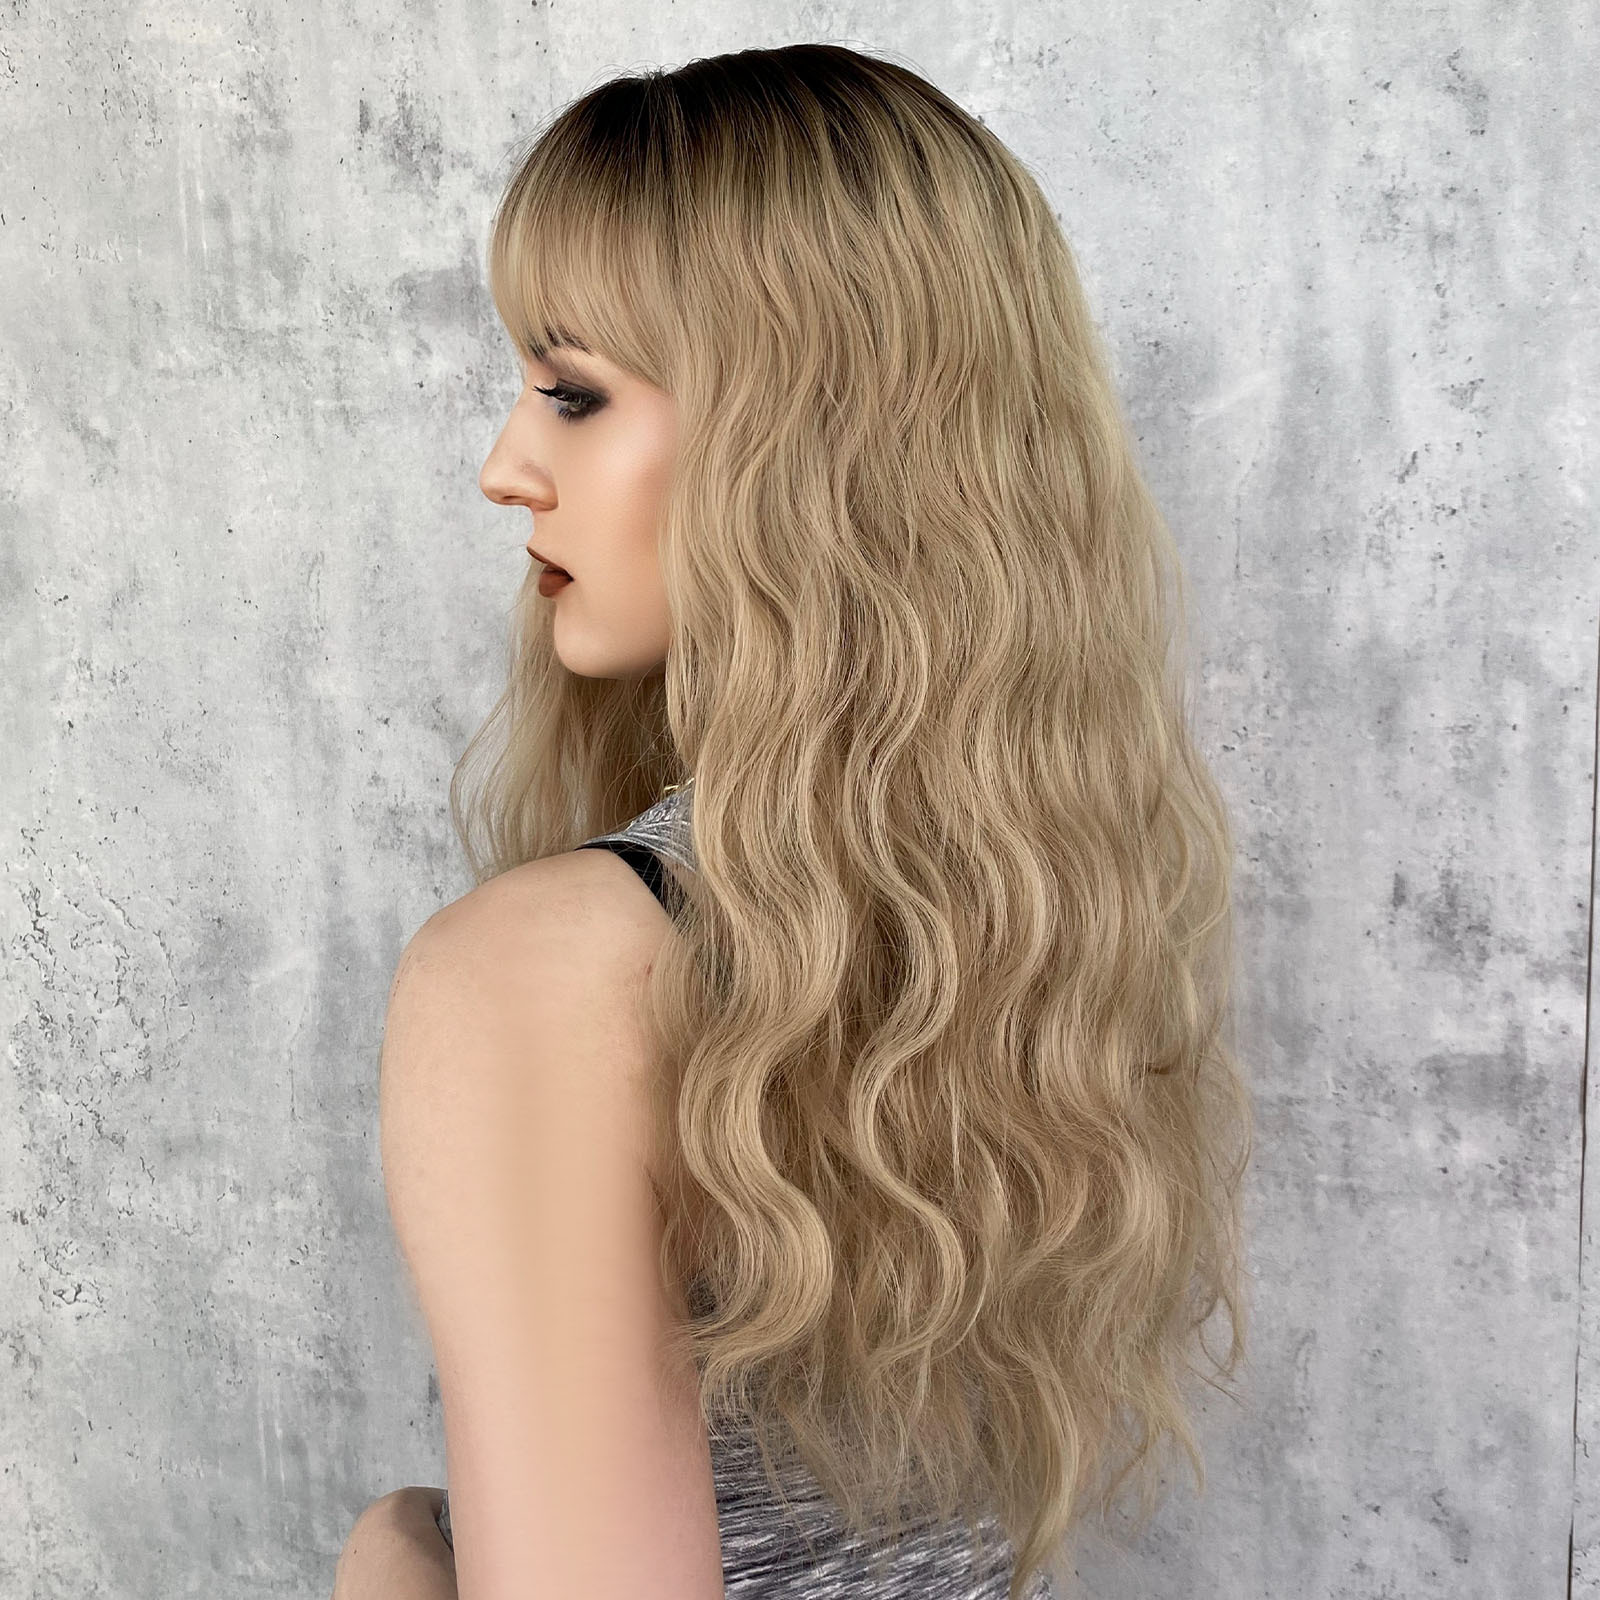 A fashionable synthetic wig for women, featuring long wavy blonde hair set on a rose net, ready for immediate use